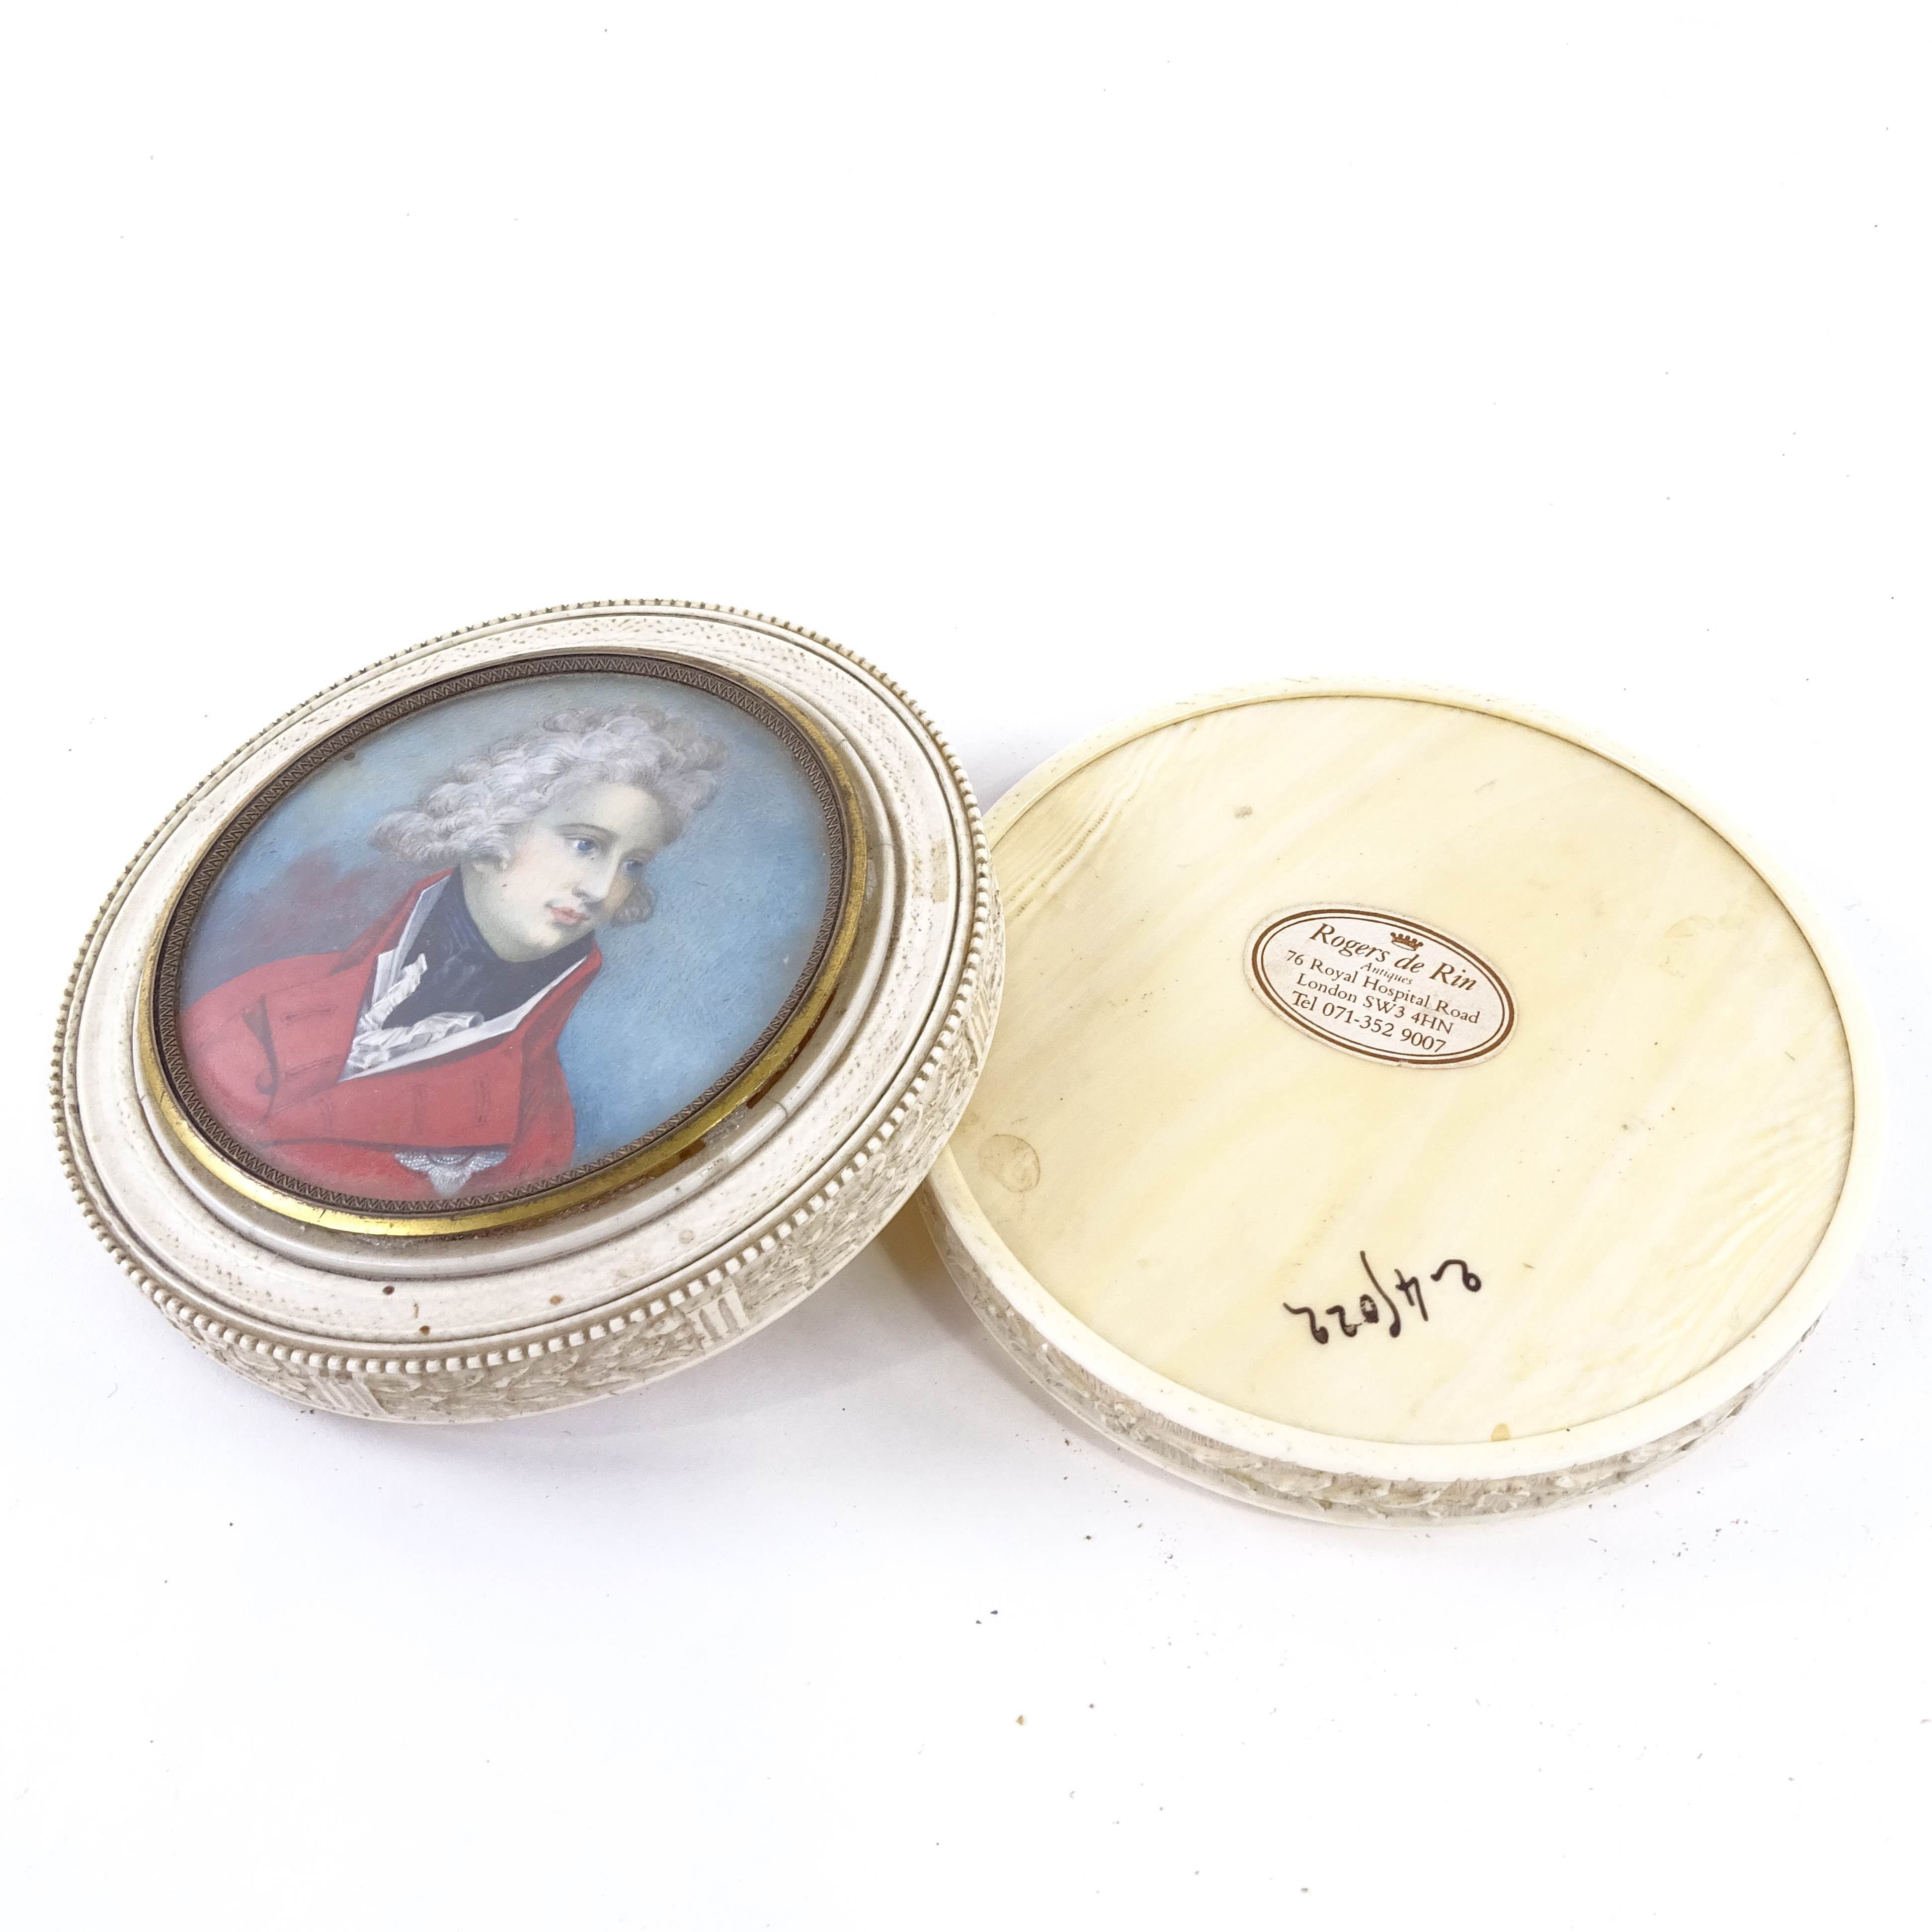 ROYAL INTEREST - an early 19th century circular ivory box, with inset painted portrait on ivory - Image 2 of 3